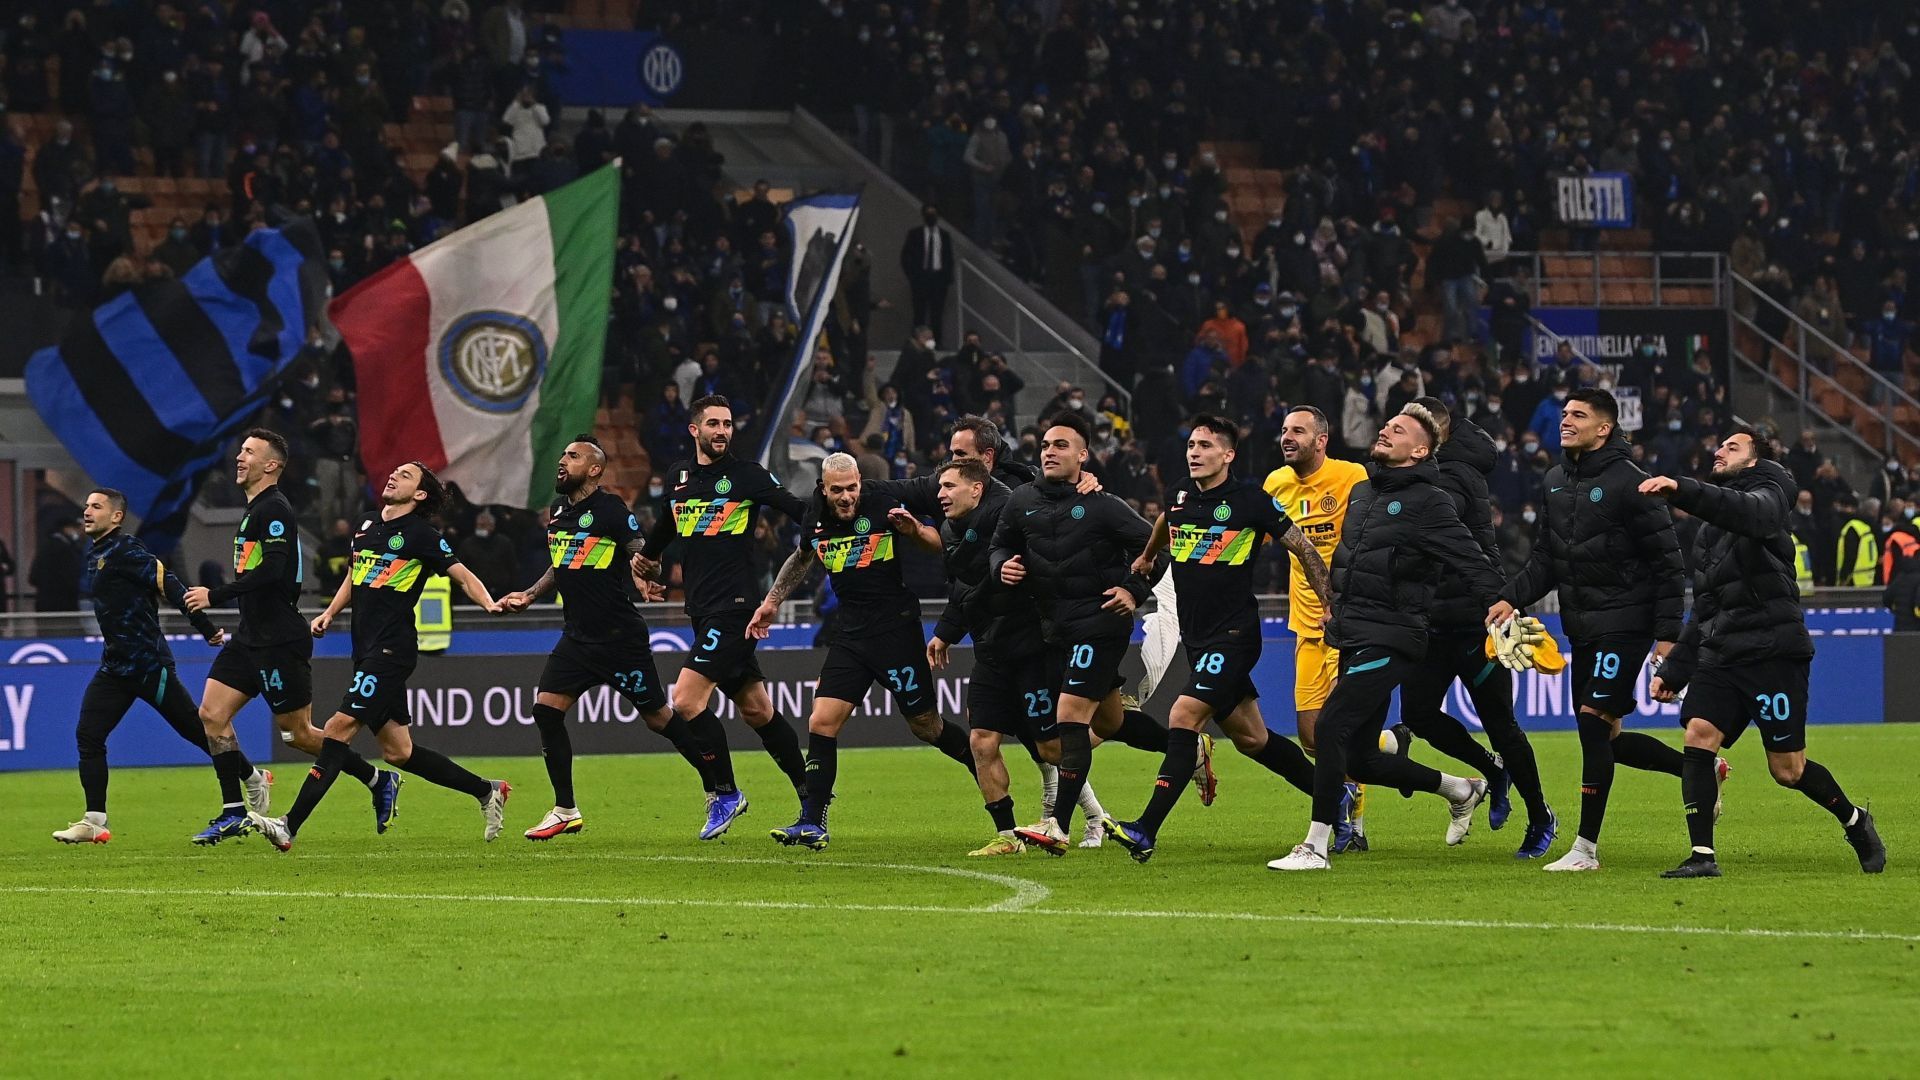 Inter Milan defeated Serie A leaders Napoli to end their unbeaten run.